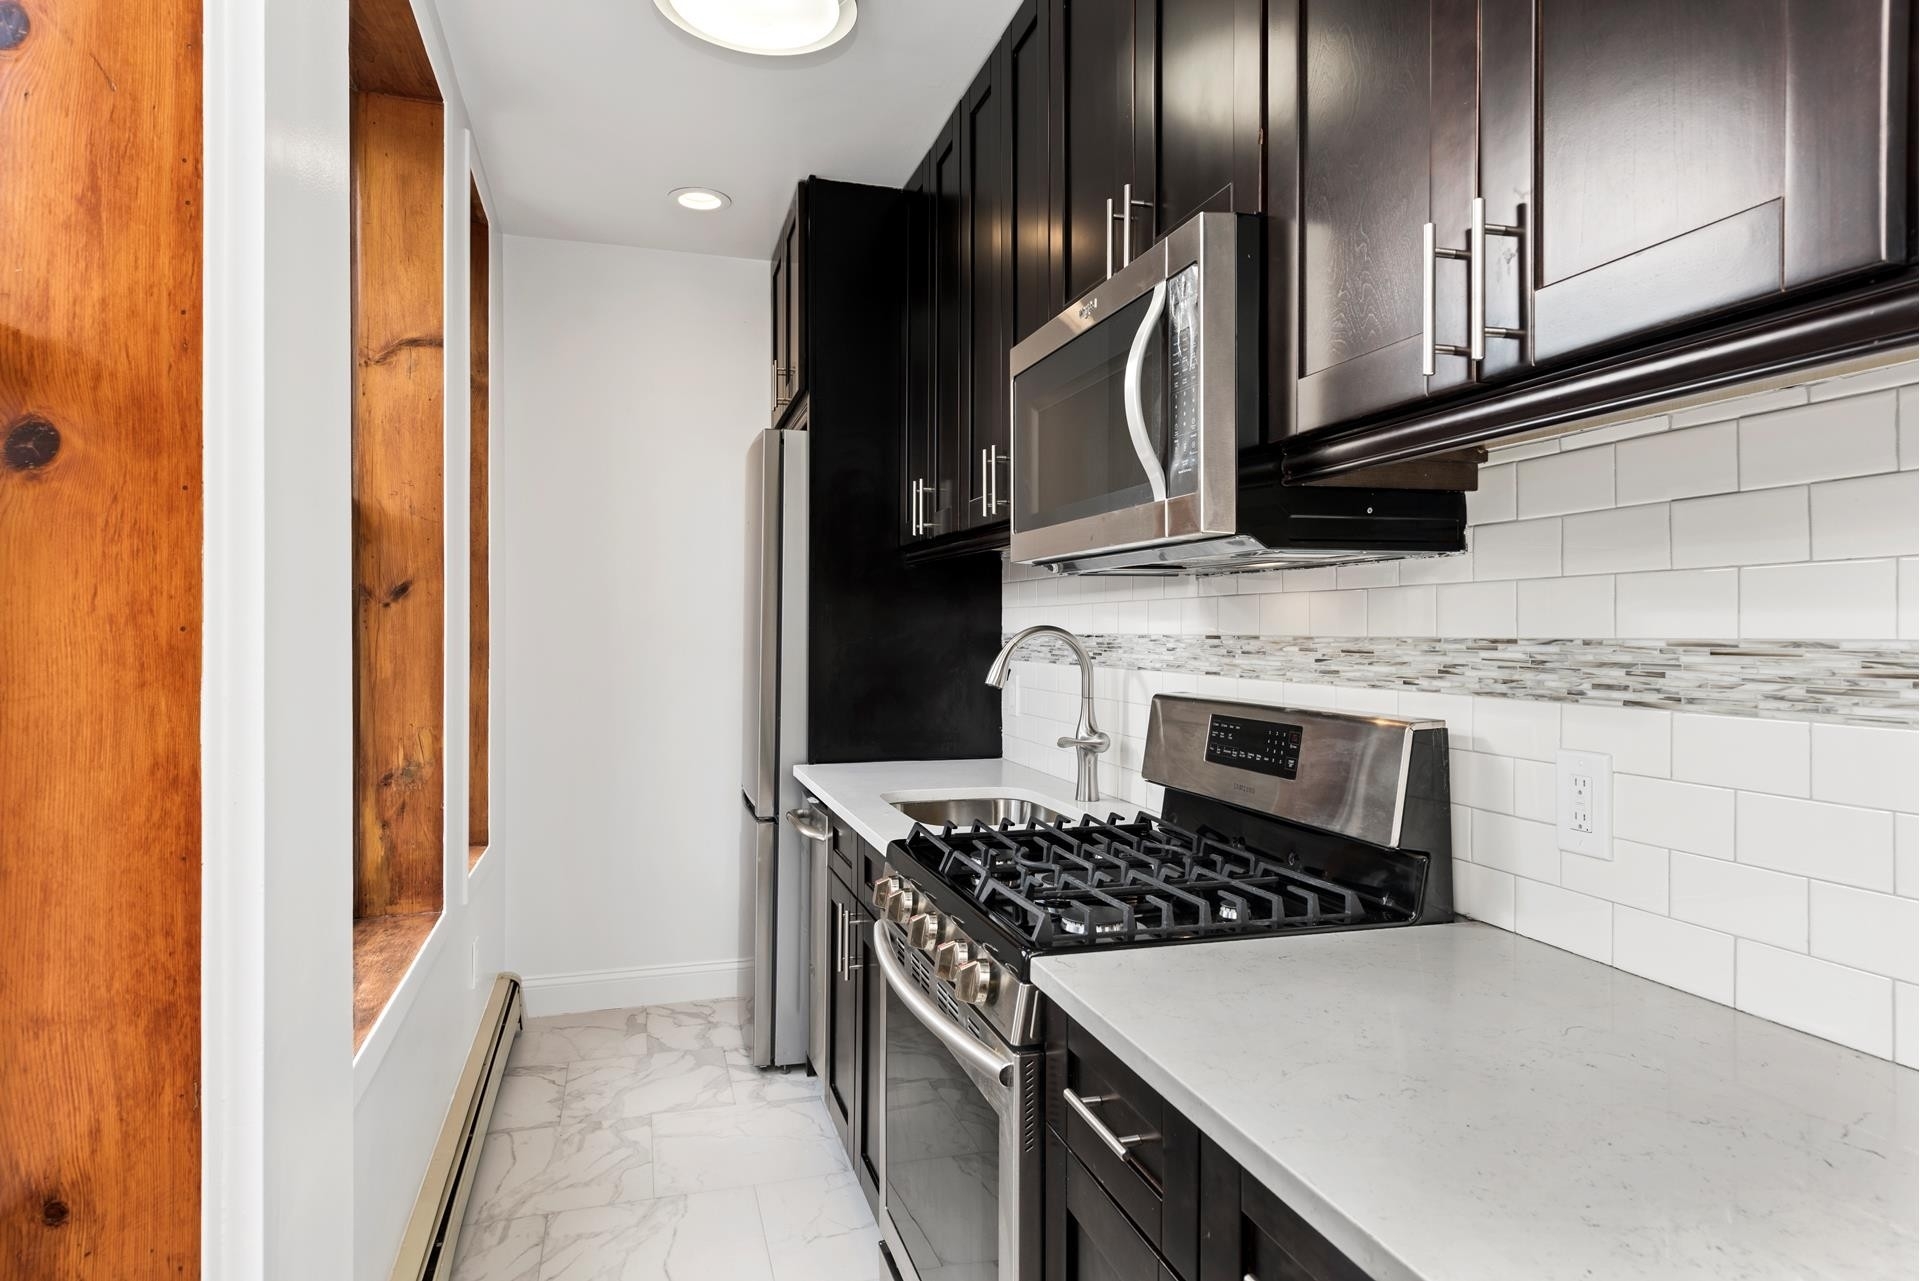 2. Rentals at 201 West 138TH, 2 New York